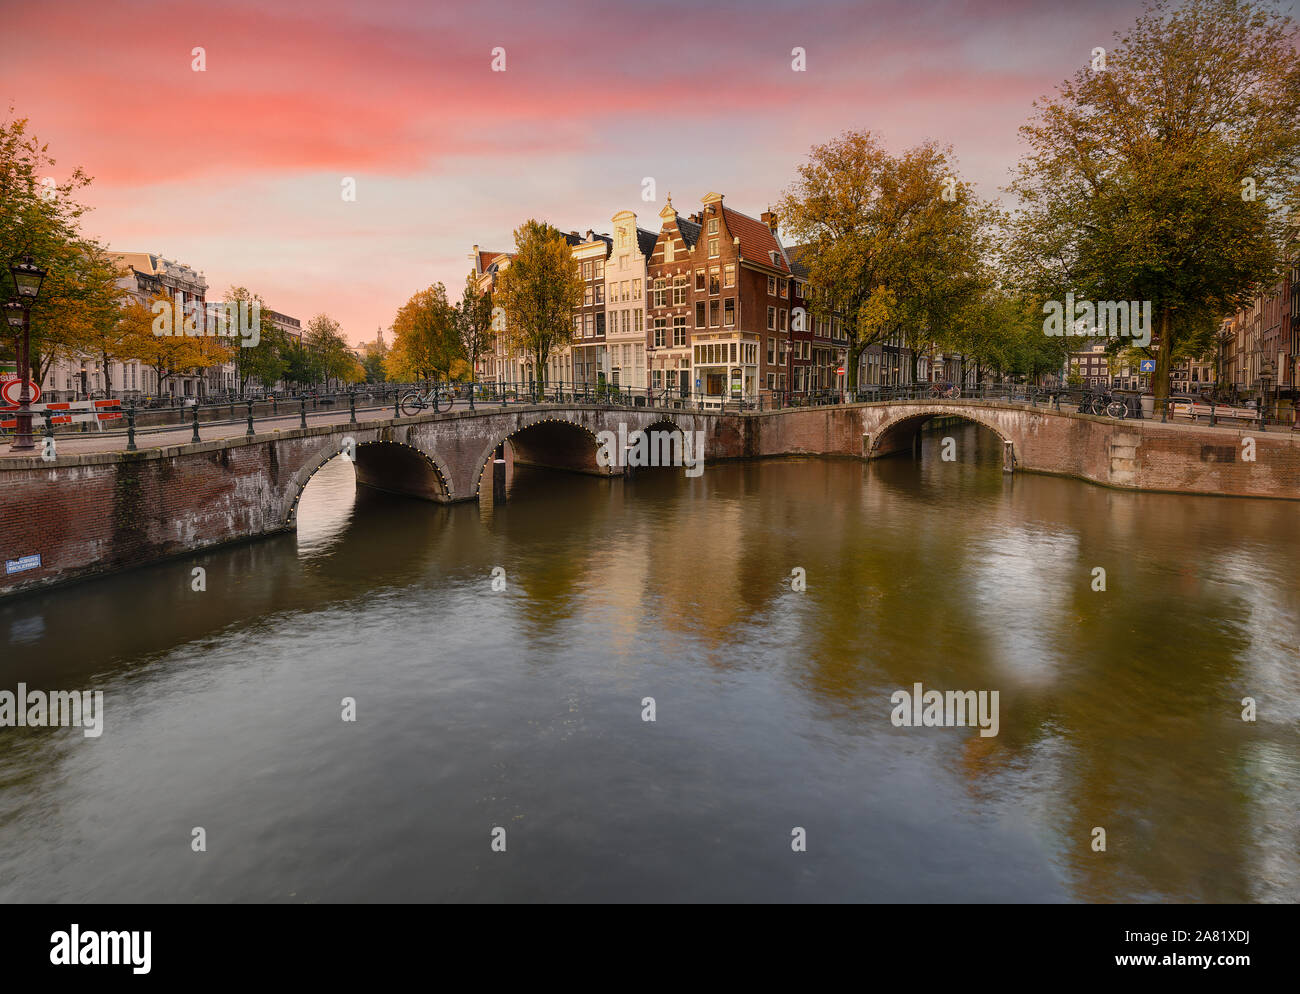 Amsterdam and Canals Stock Photo - Alamy